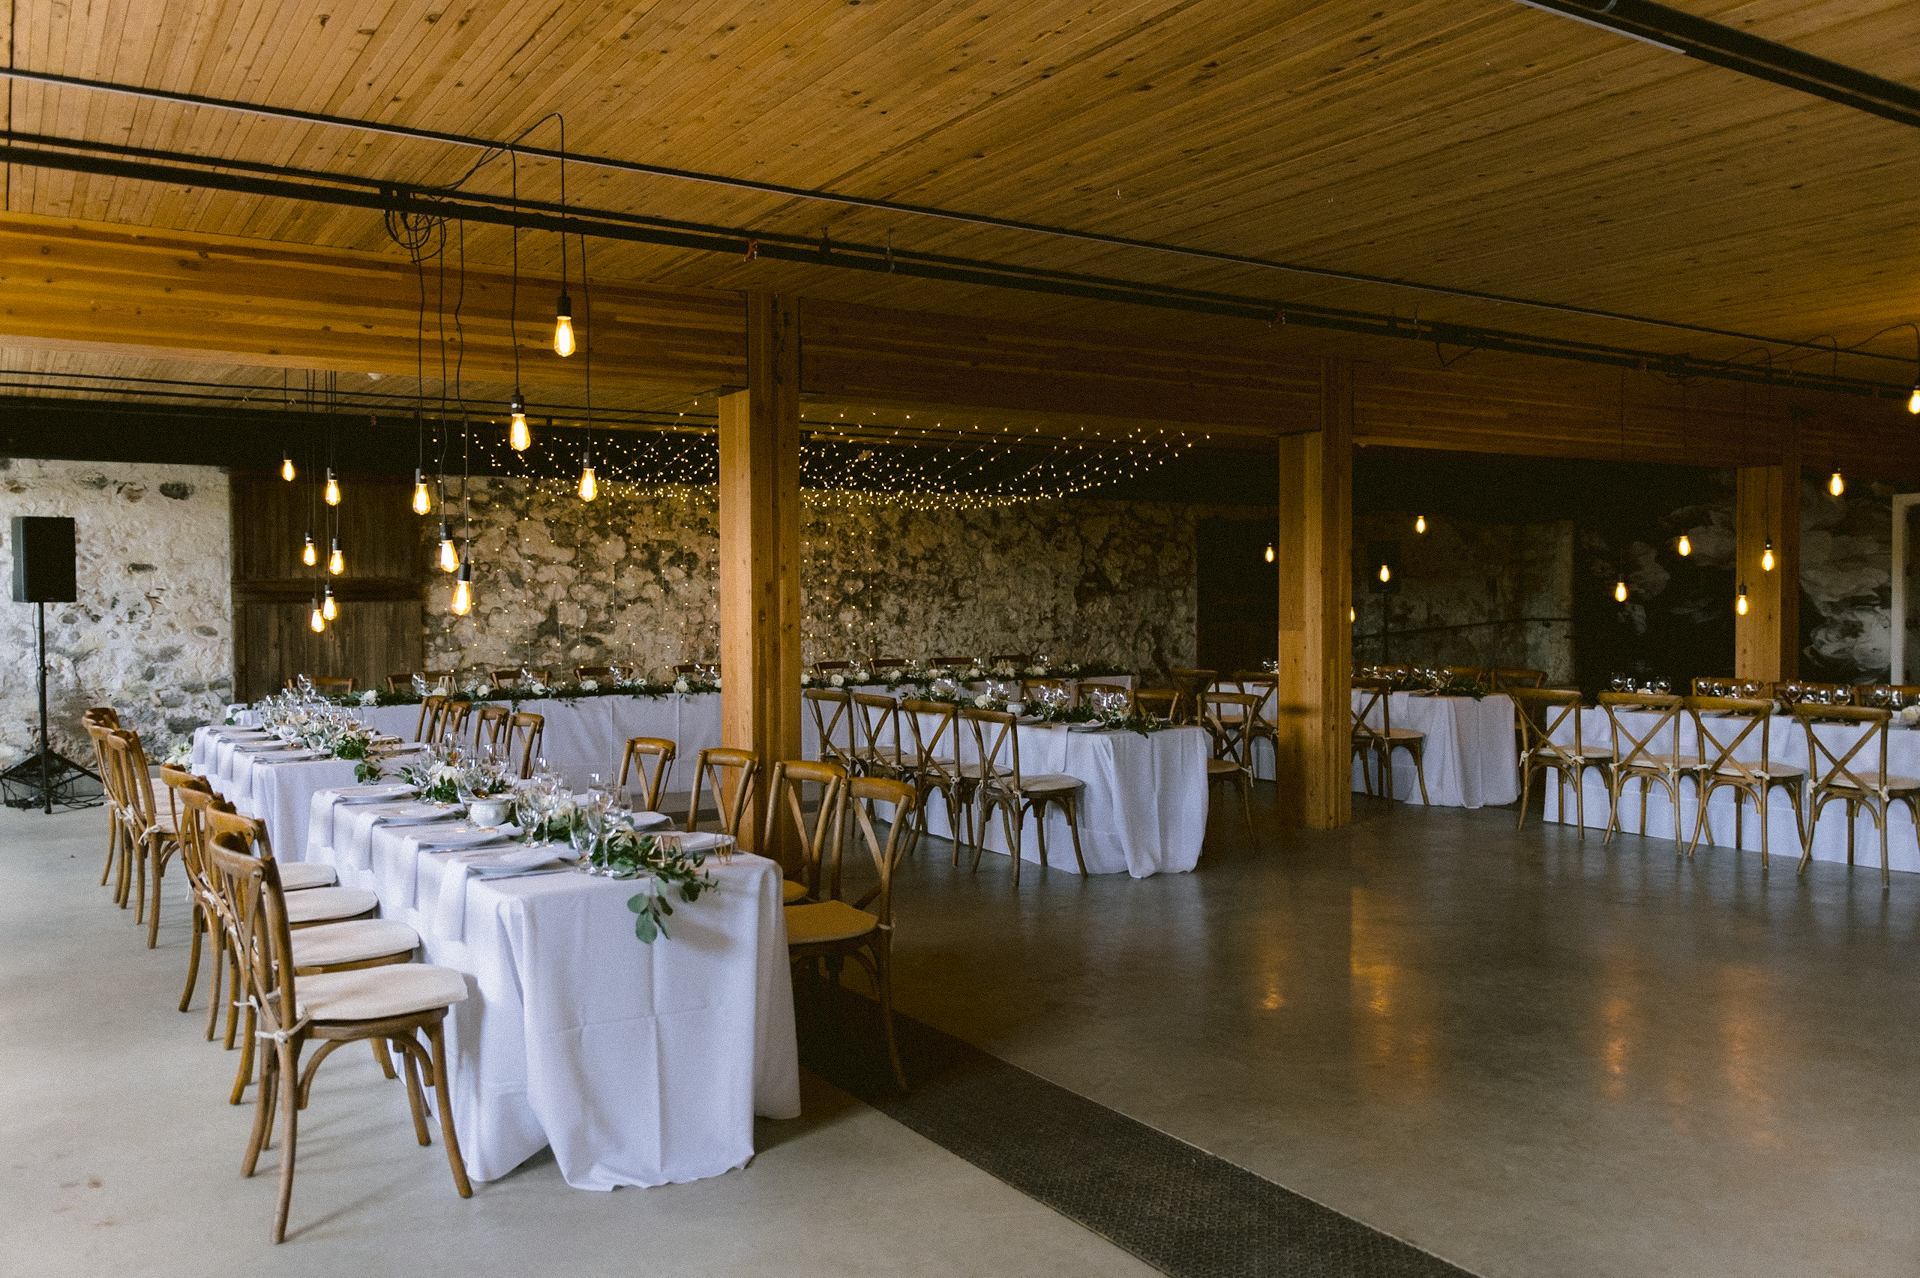 A rustic backdrop with hanging lights and elegant flower displays, setting the stage for a romantic wedding at The Byre, Cambium Farms.